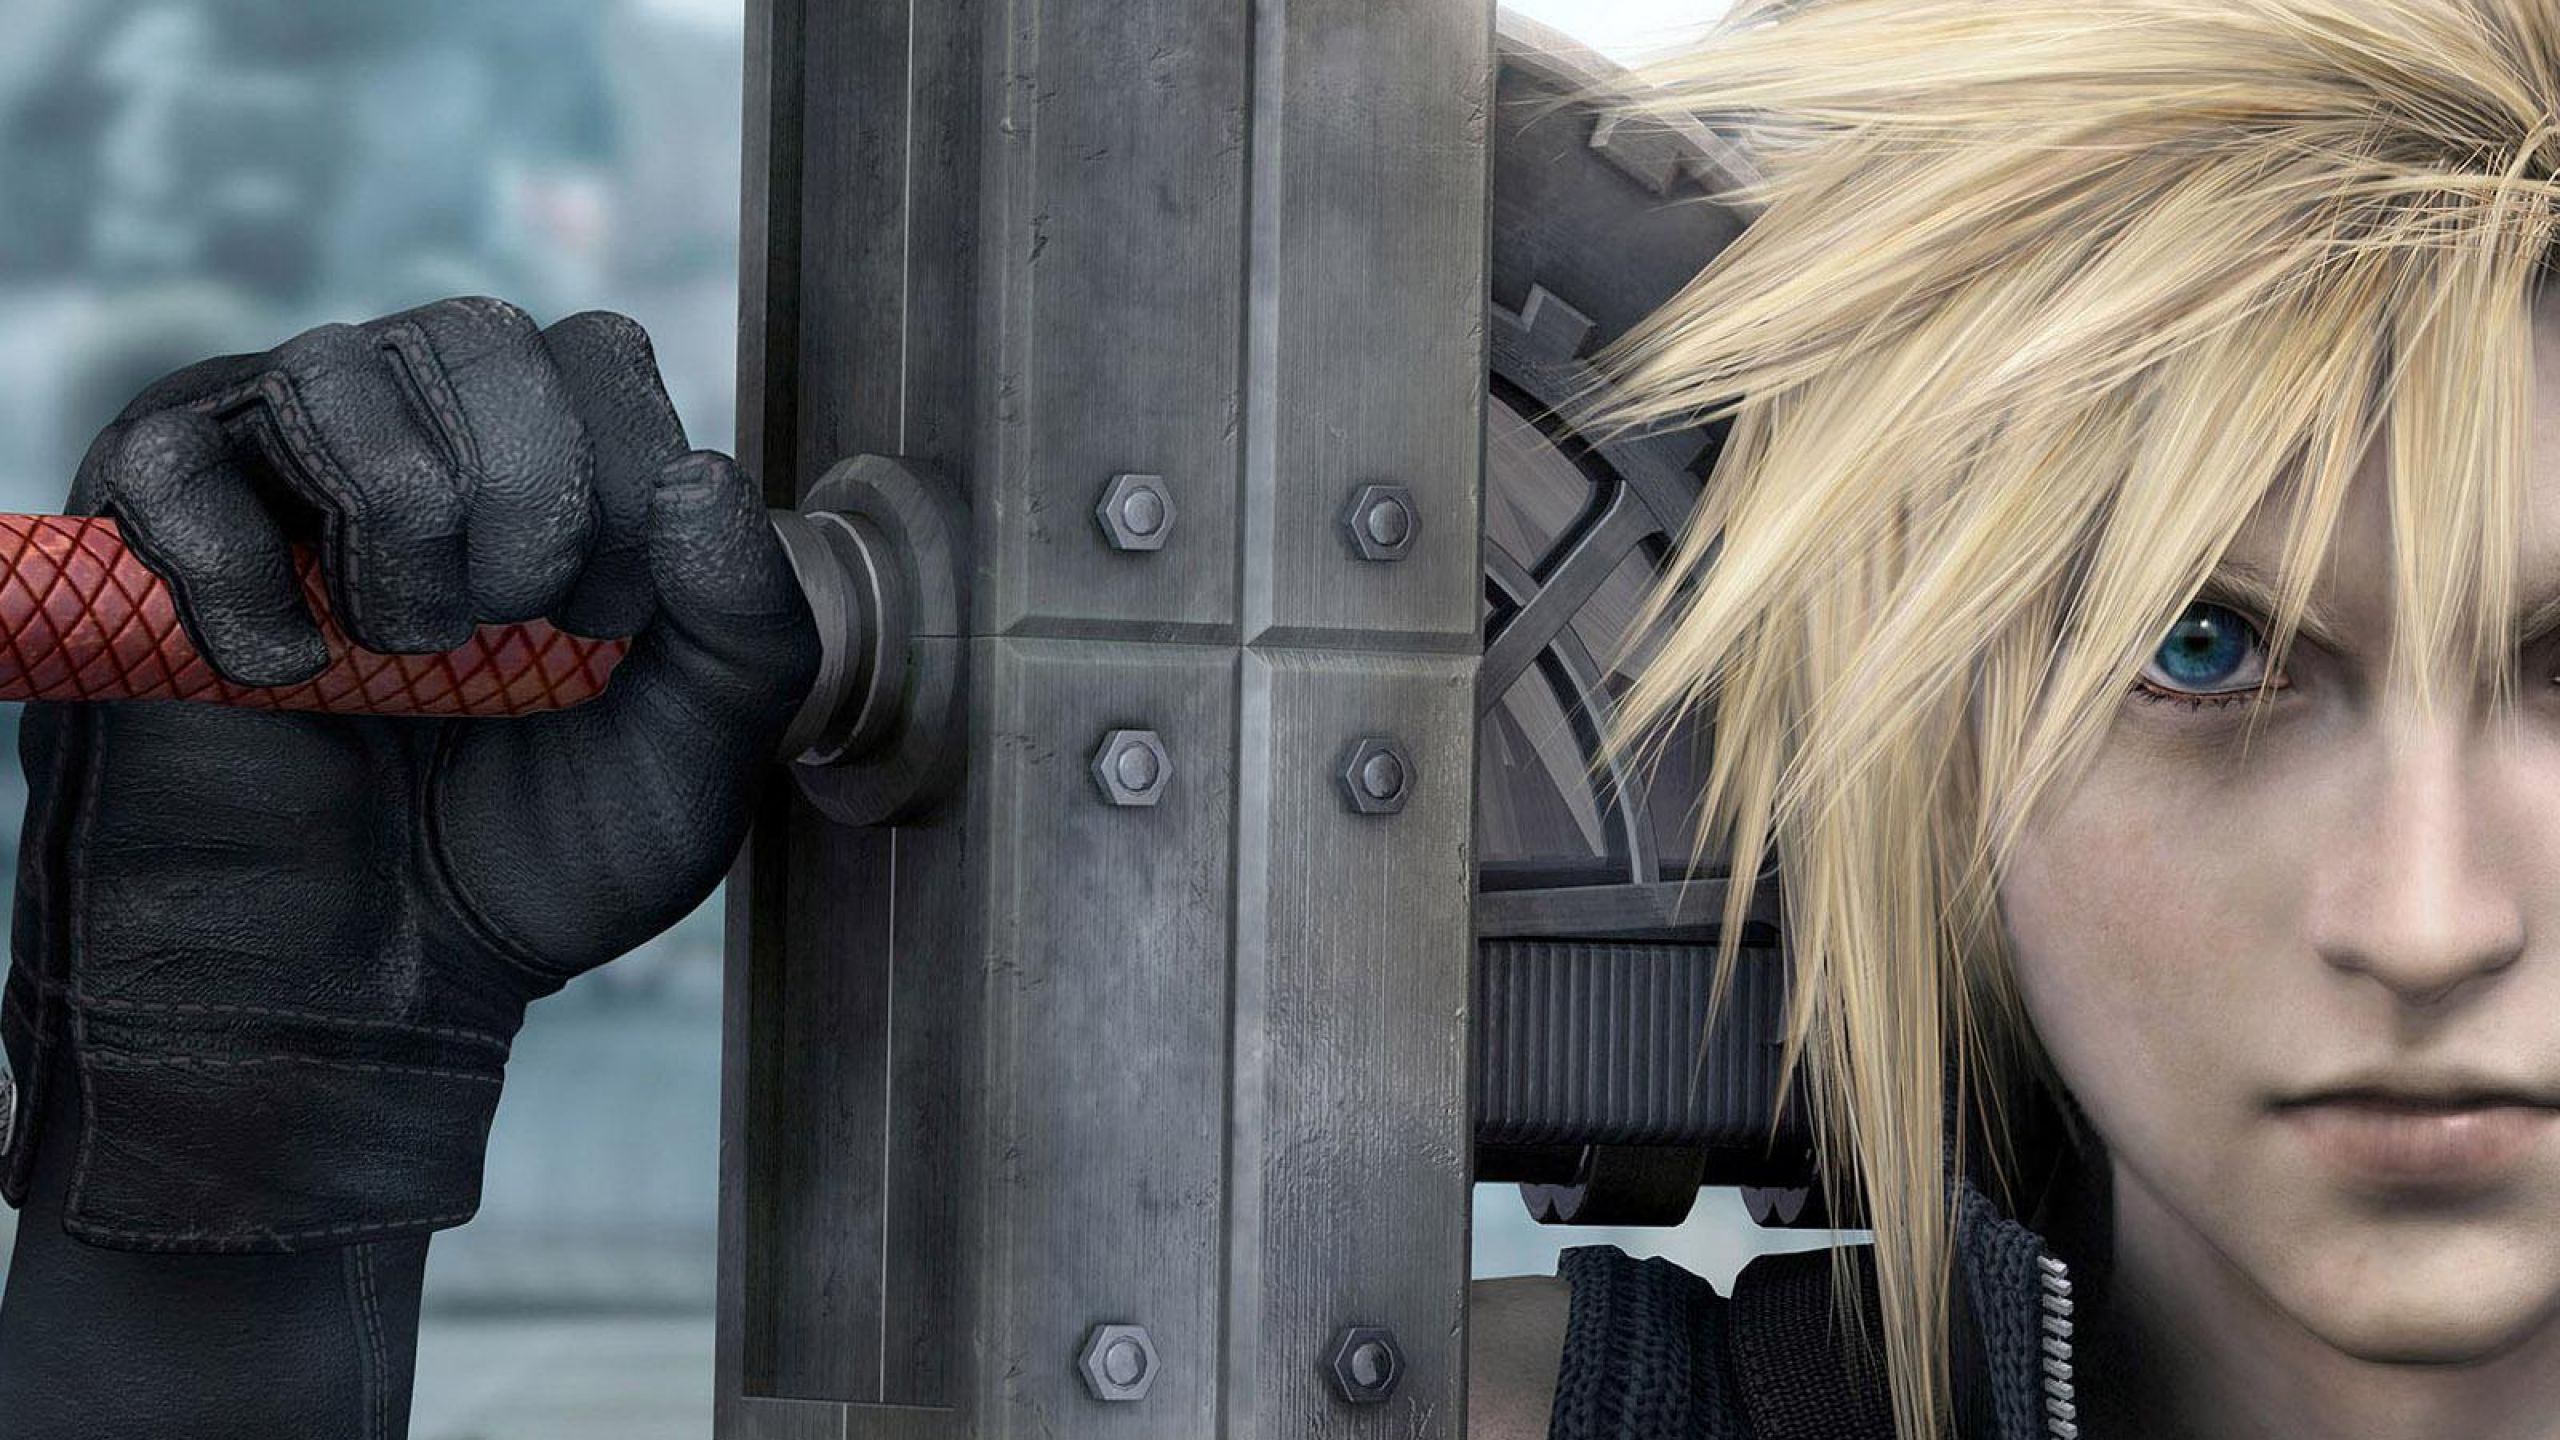 Cloud Strife wielding a sword in a fantasy setting from Final Fantasy VII: Advent Children